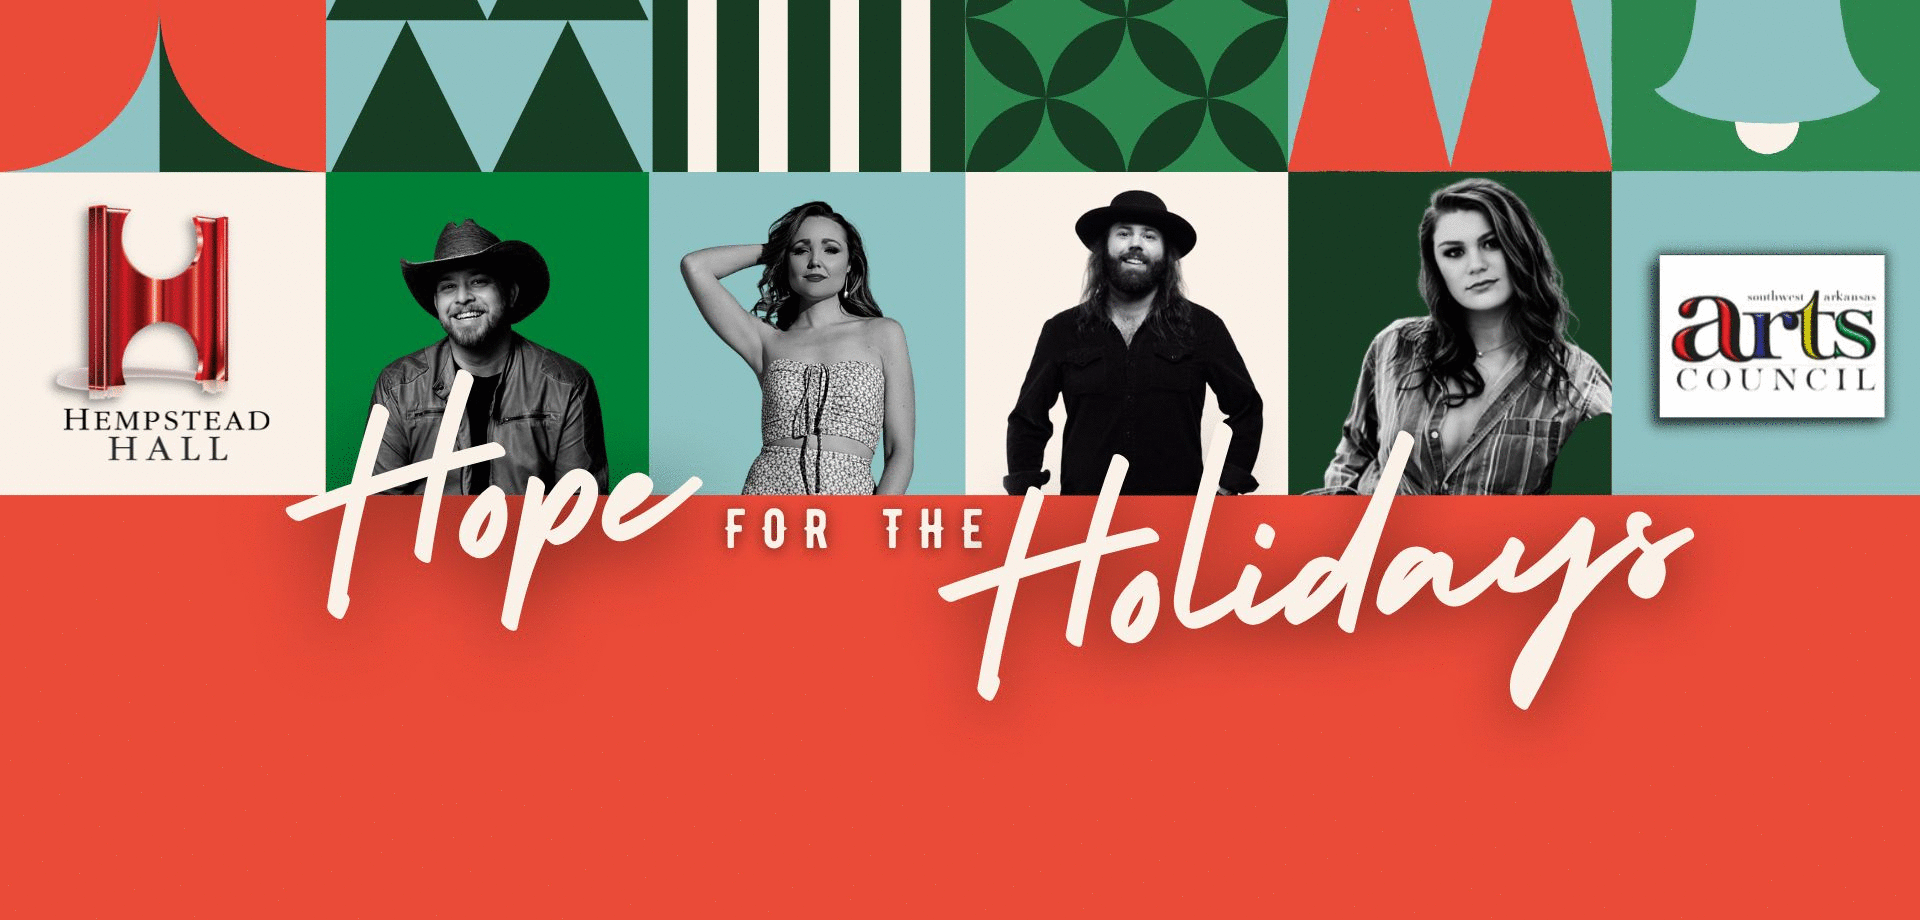 Hope for the Holidays Concert!